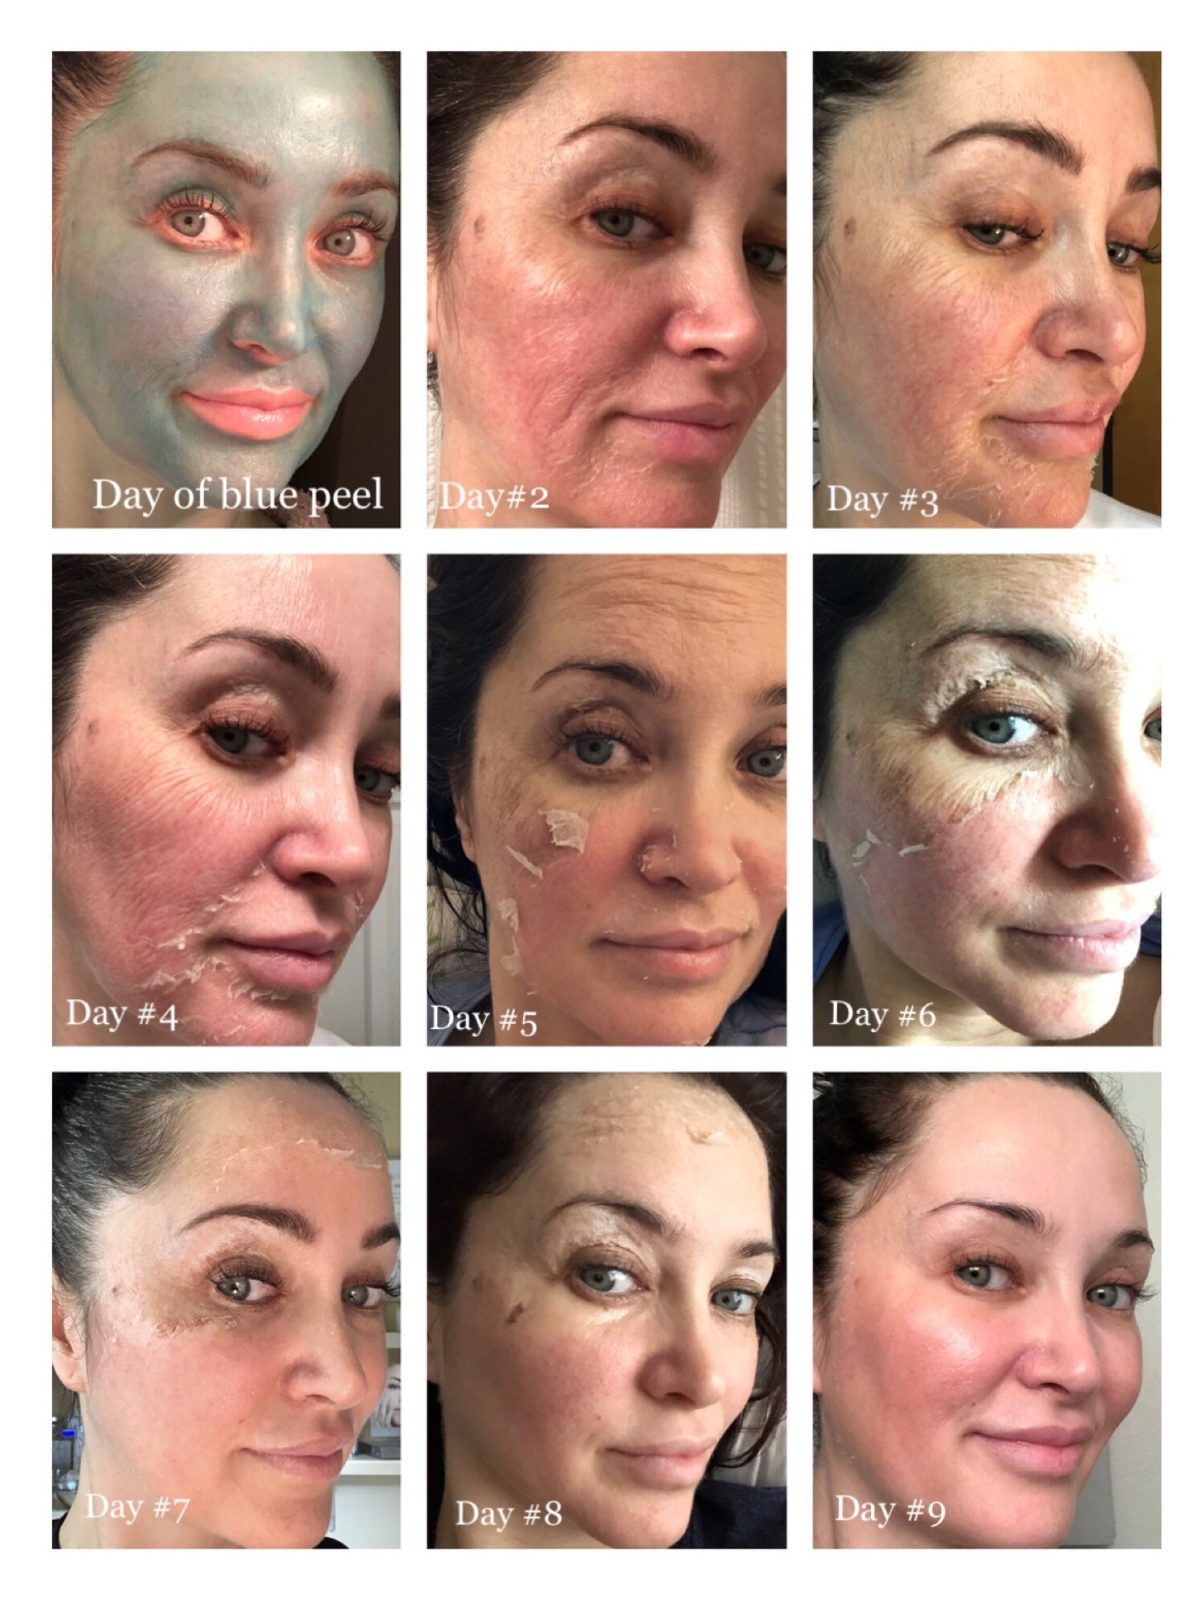 Trish's skin peeling and then improving over a 9-day recovery period